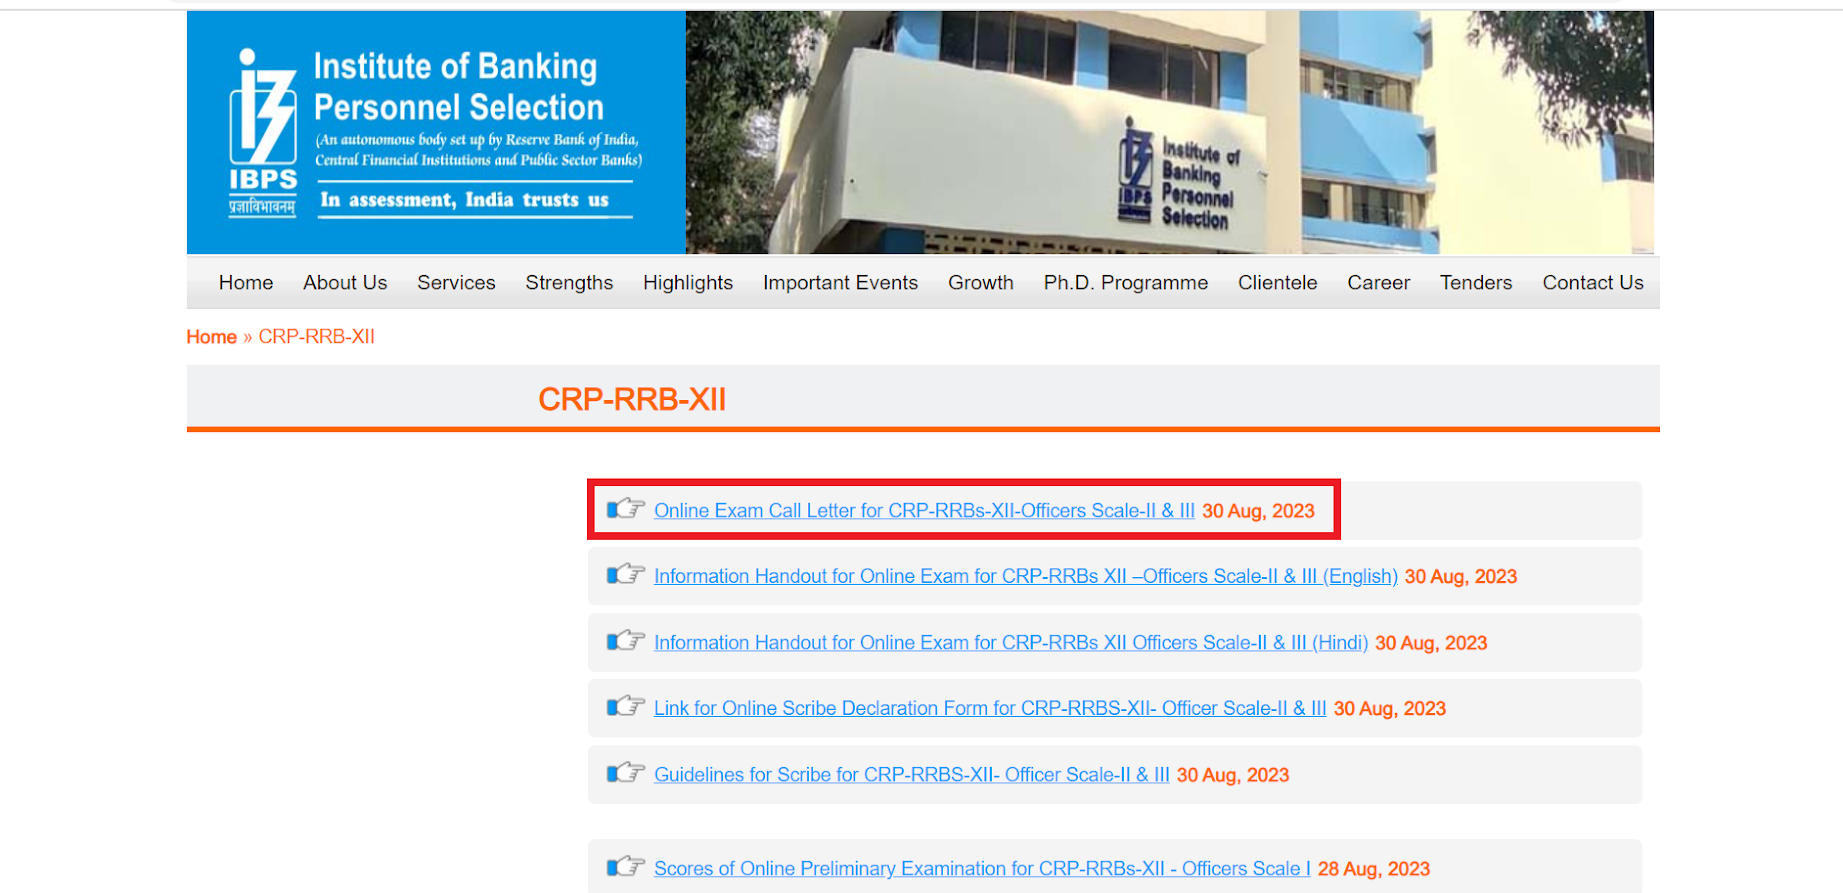 IBPS RRB Officer Scale 2 and 3 Admit Card 2023 Out, Check Download Link_50.1